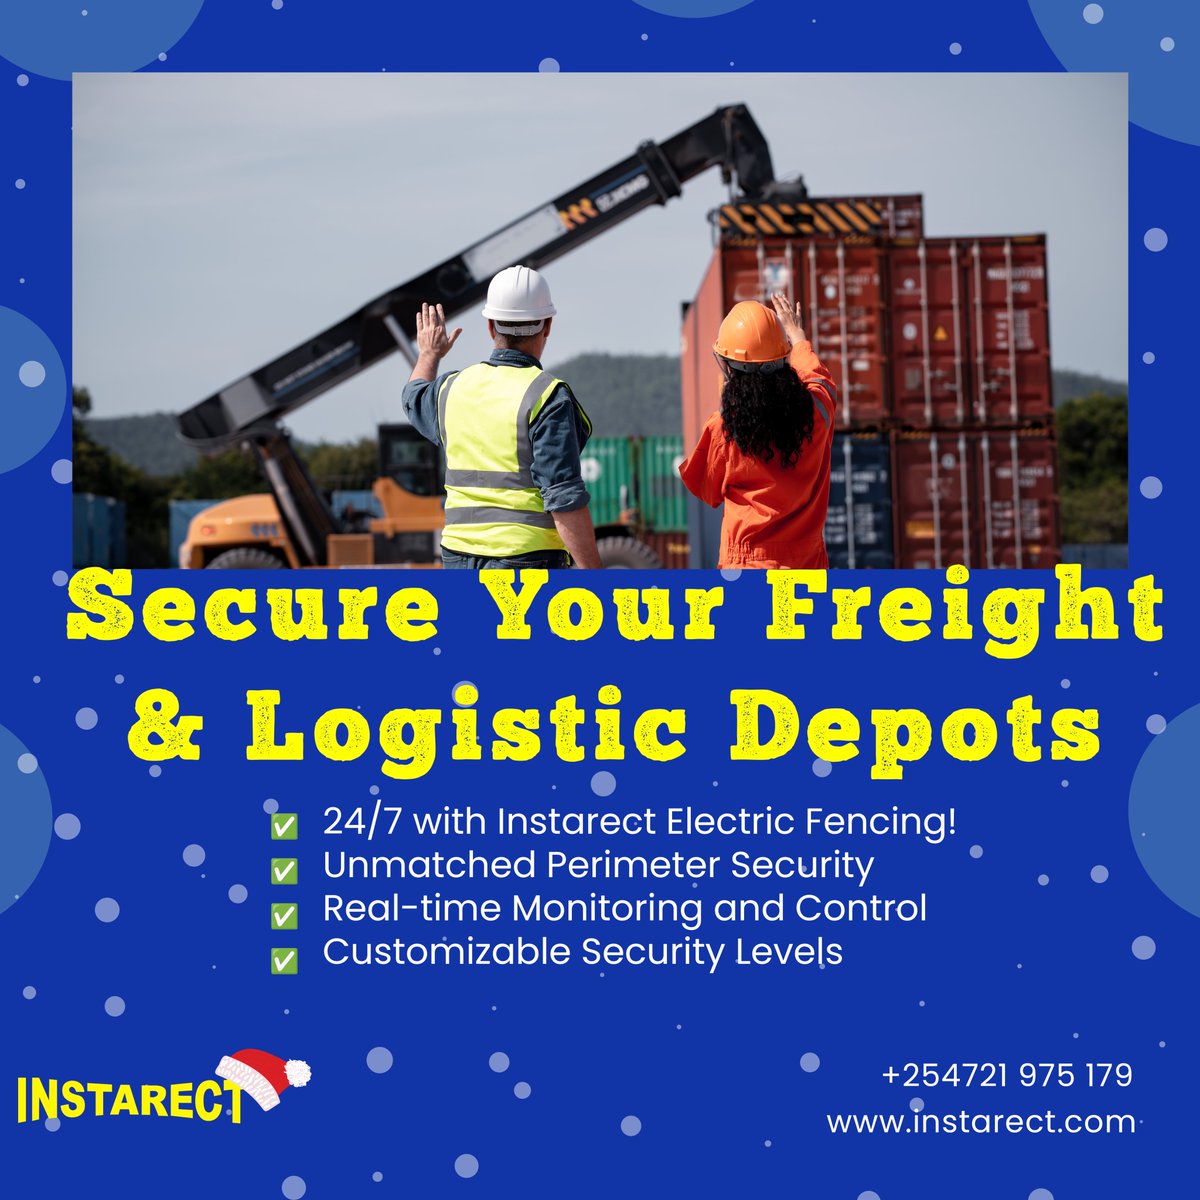 Enhance your freight and logistics security with #InstarectElectricFencing!
Peace of mind for your cargo!
🌐 #LogisticsSecurity
#SecureFreight #Electricfencingkenya